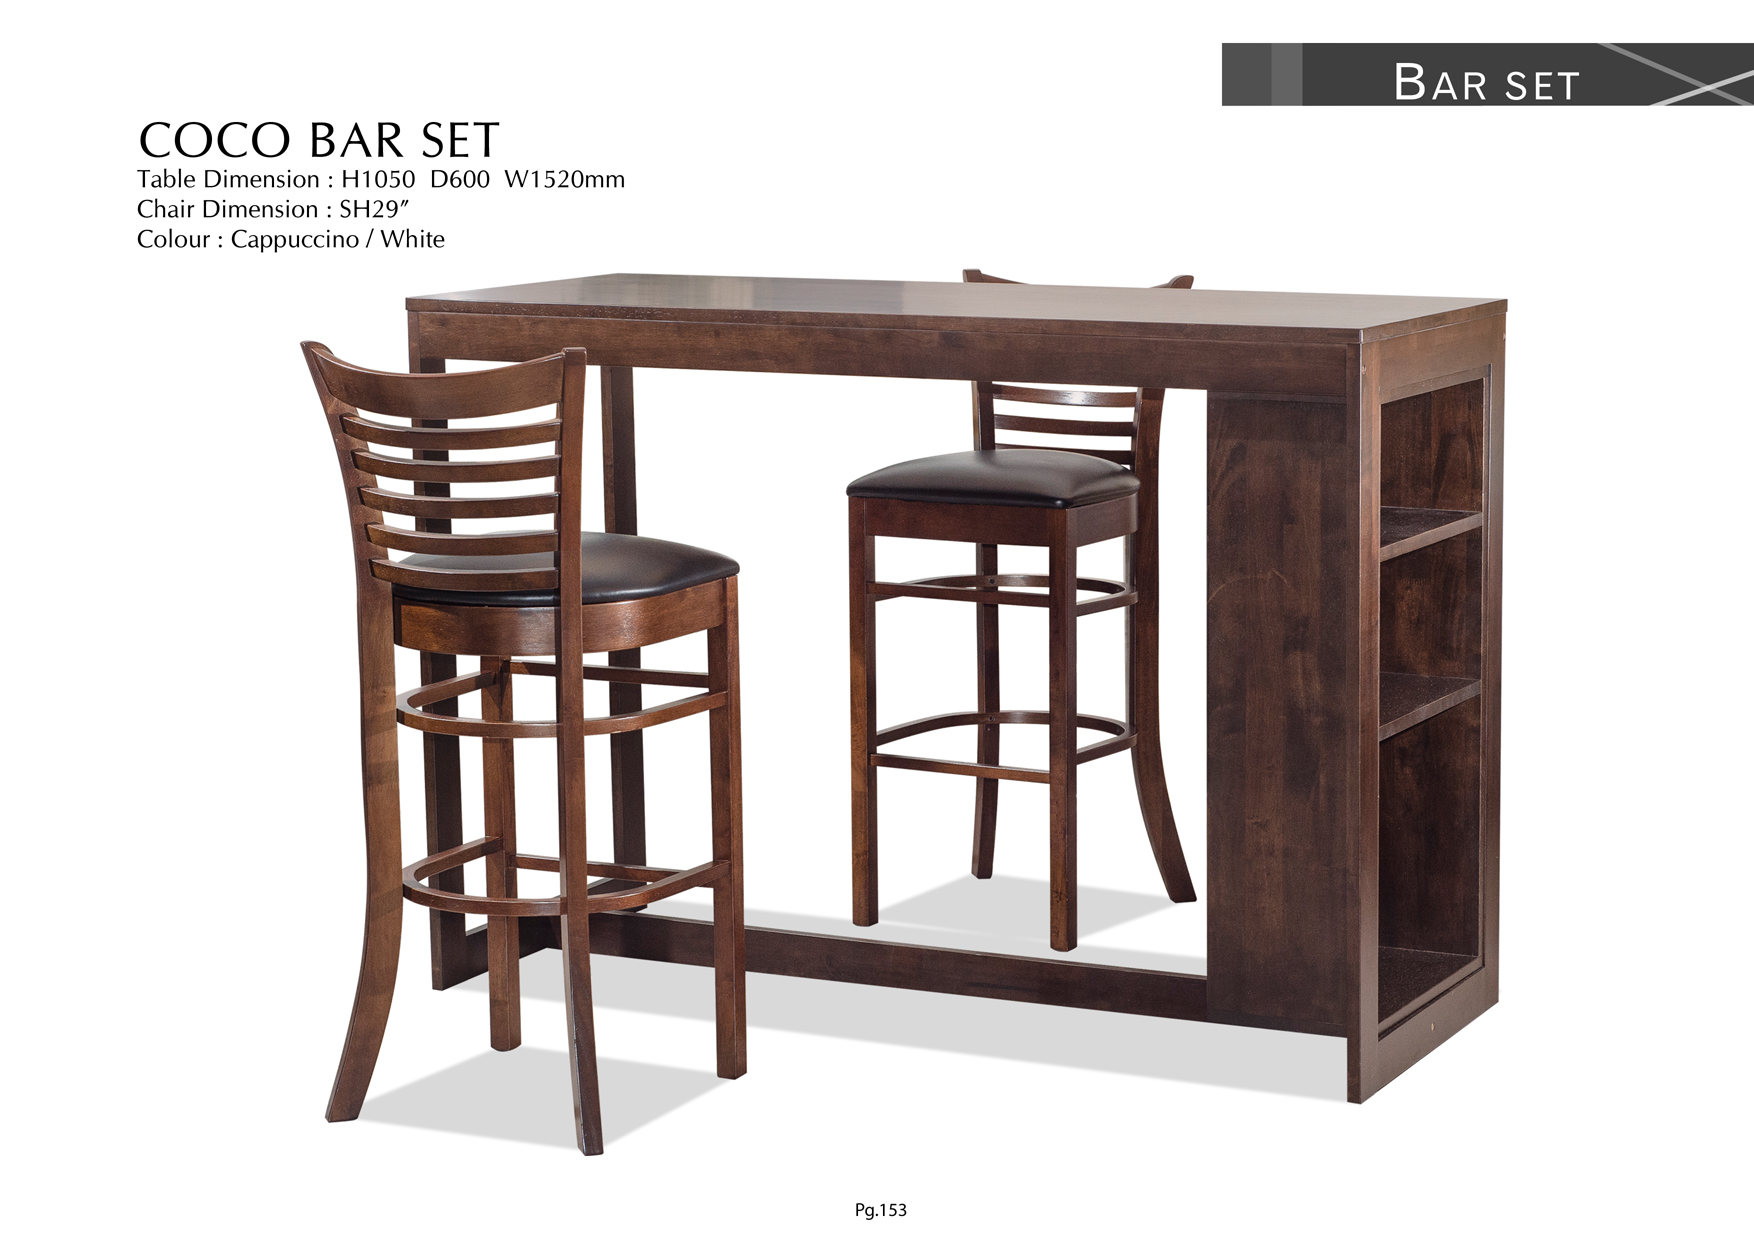 Product: PG153. COCO BAR SET